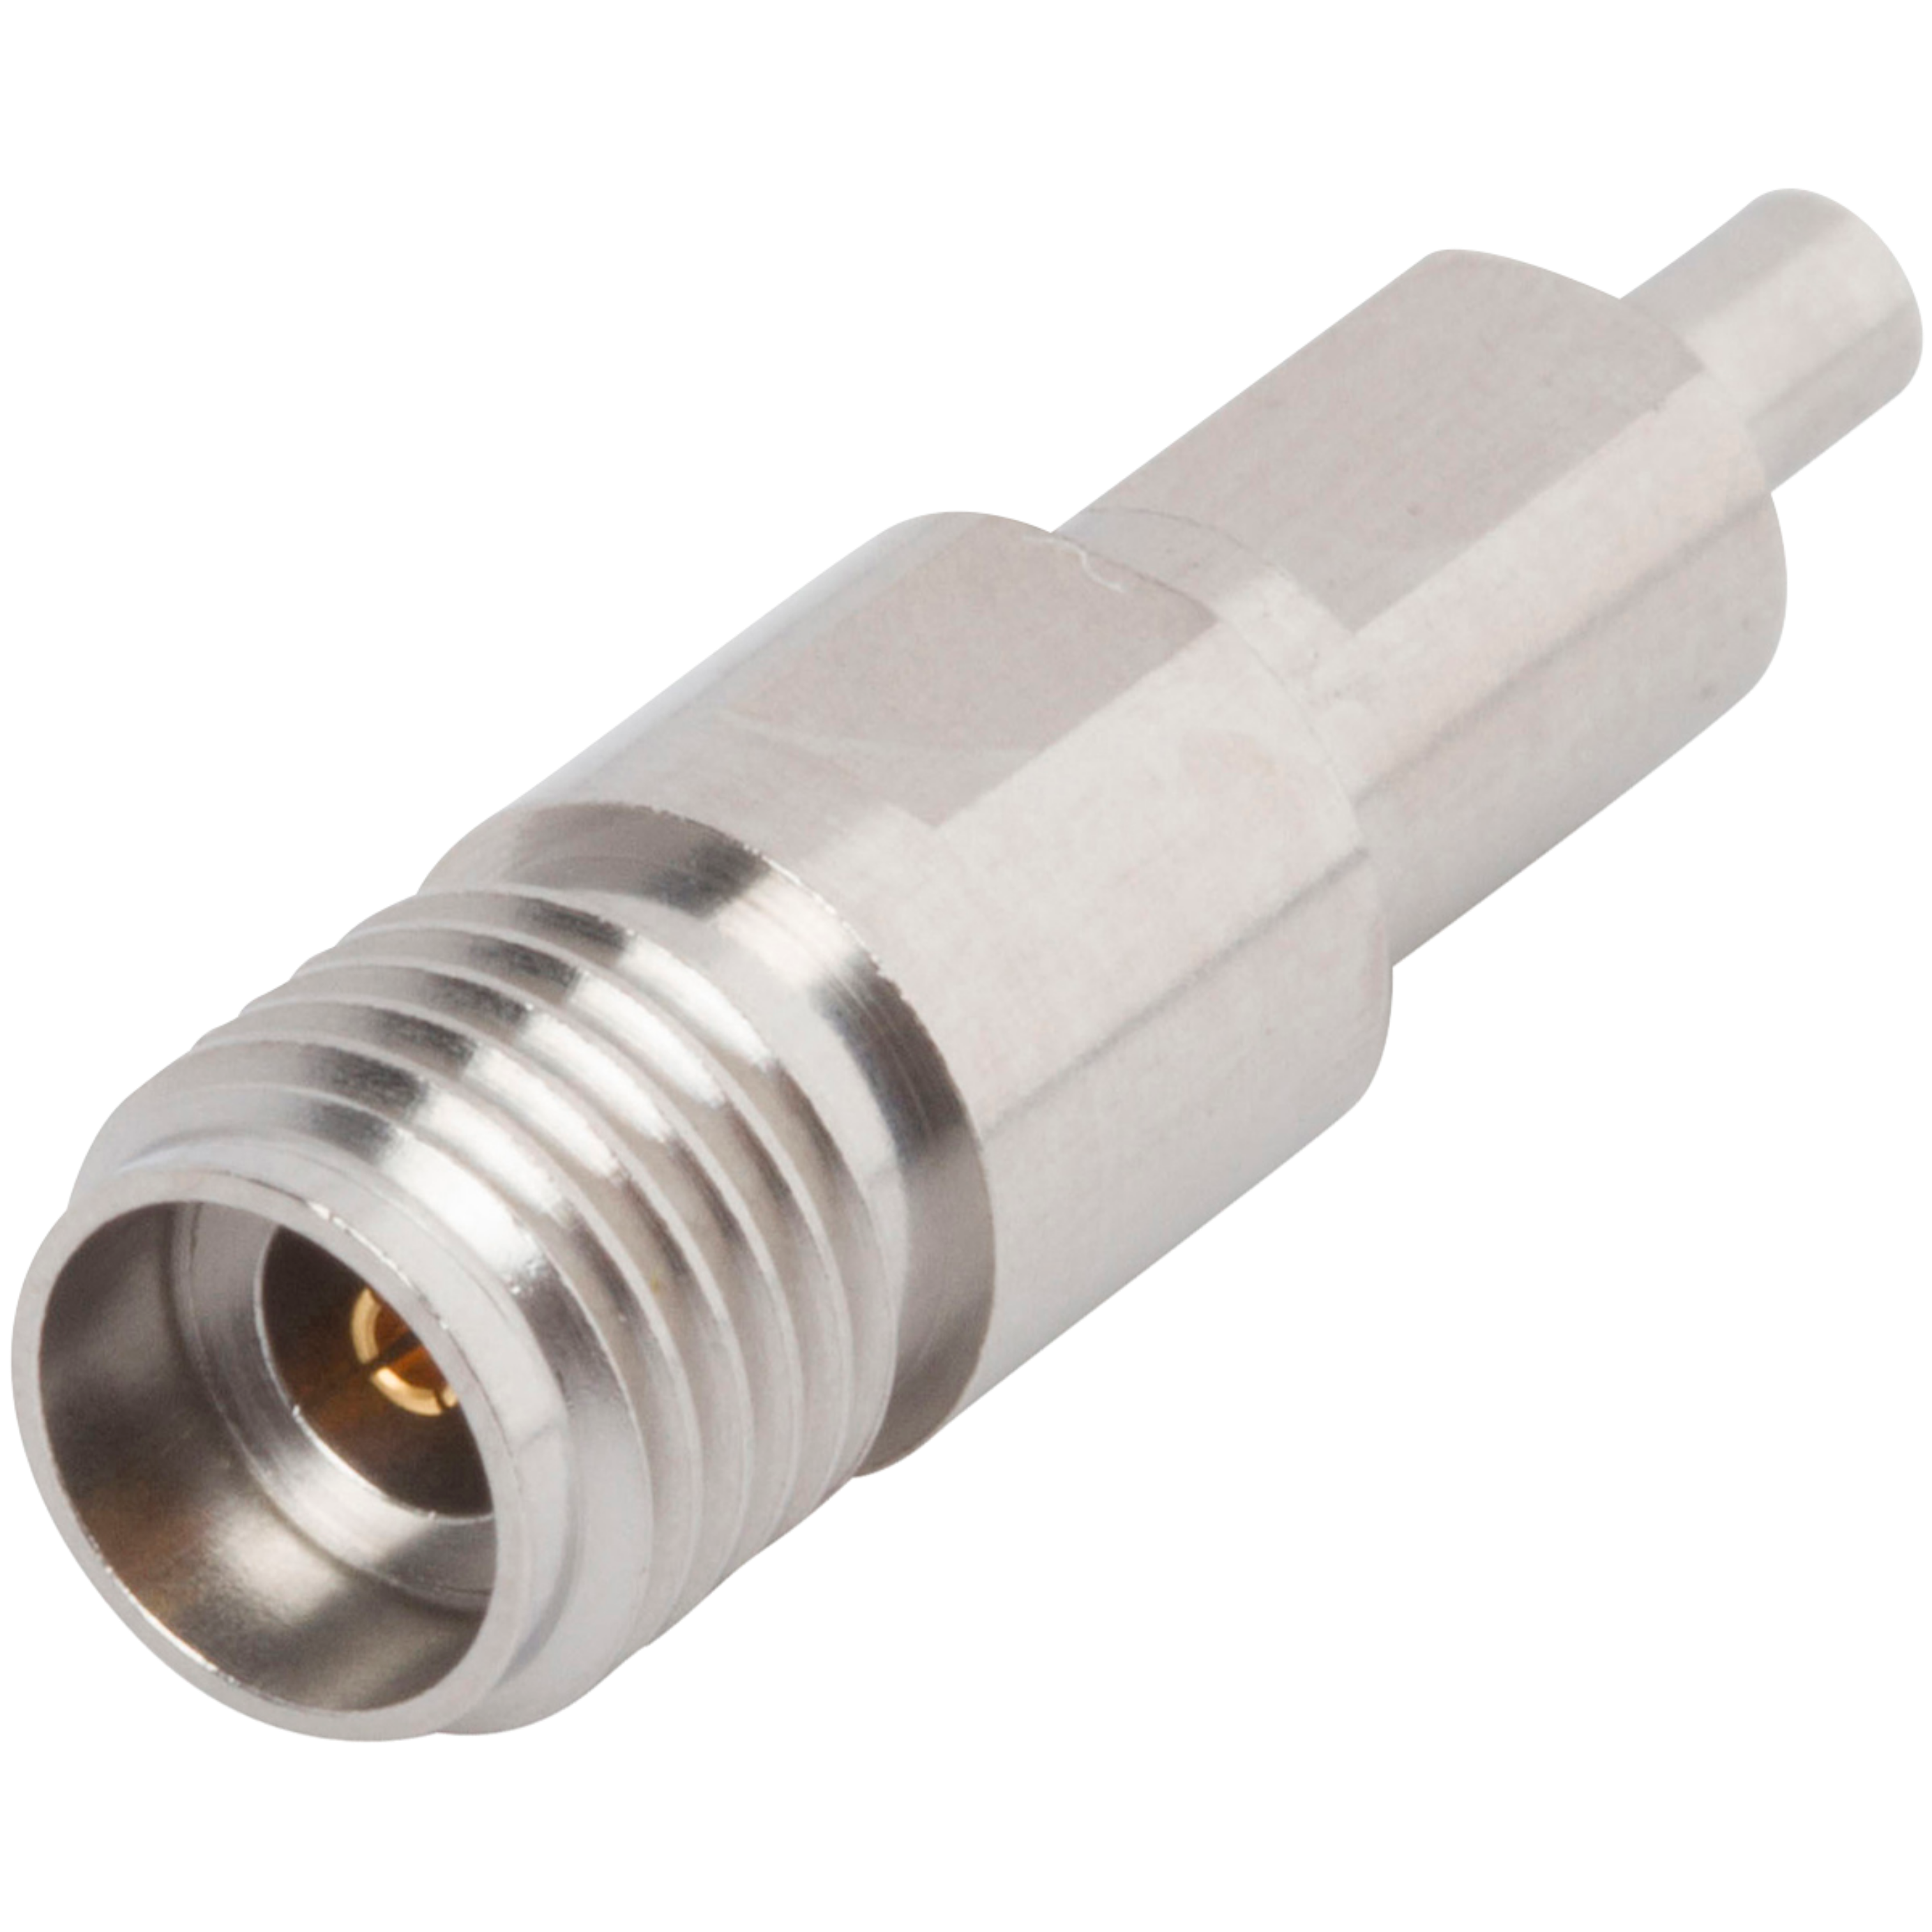 Picture of SMPS Male  to 2.92mm Female Adapter, SB